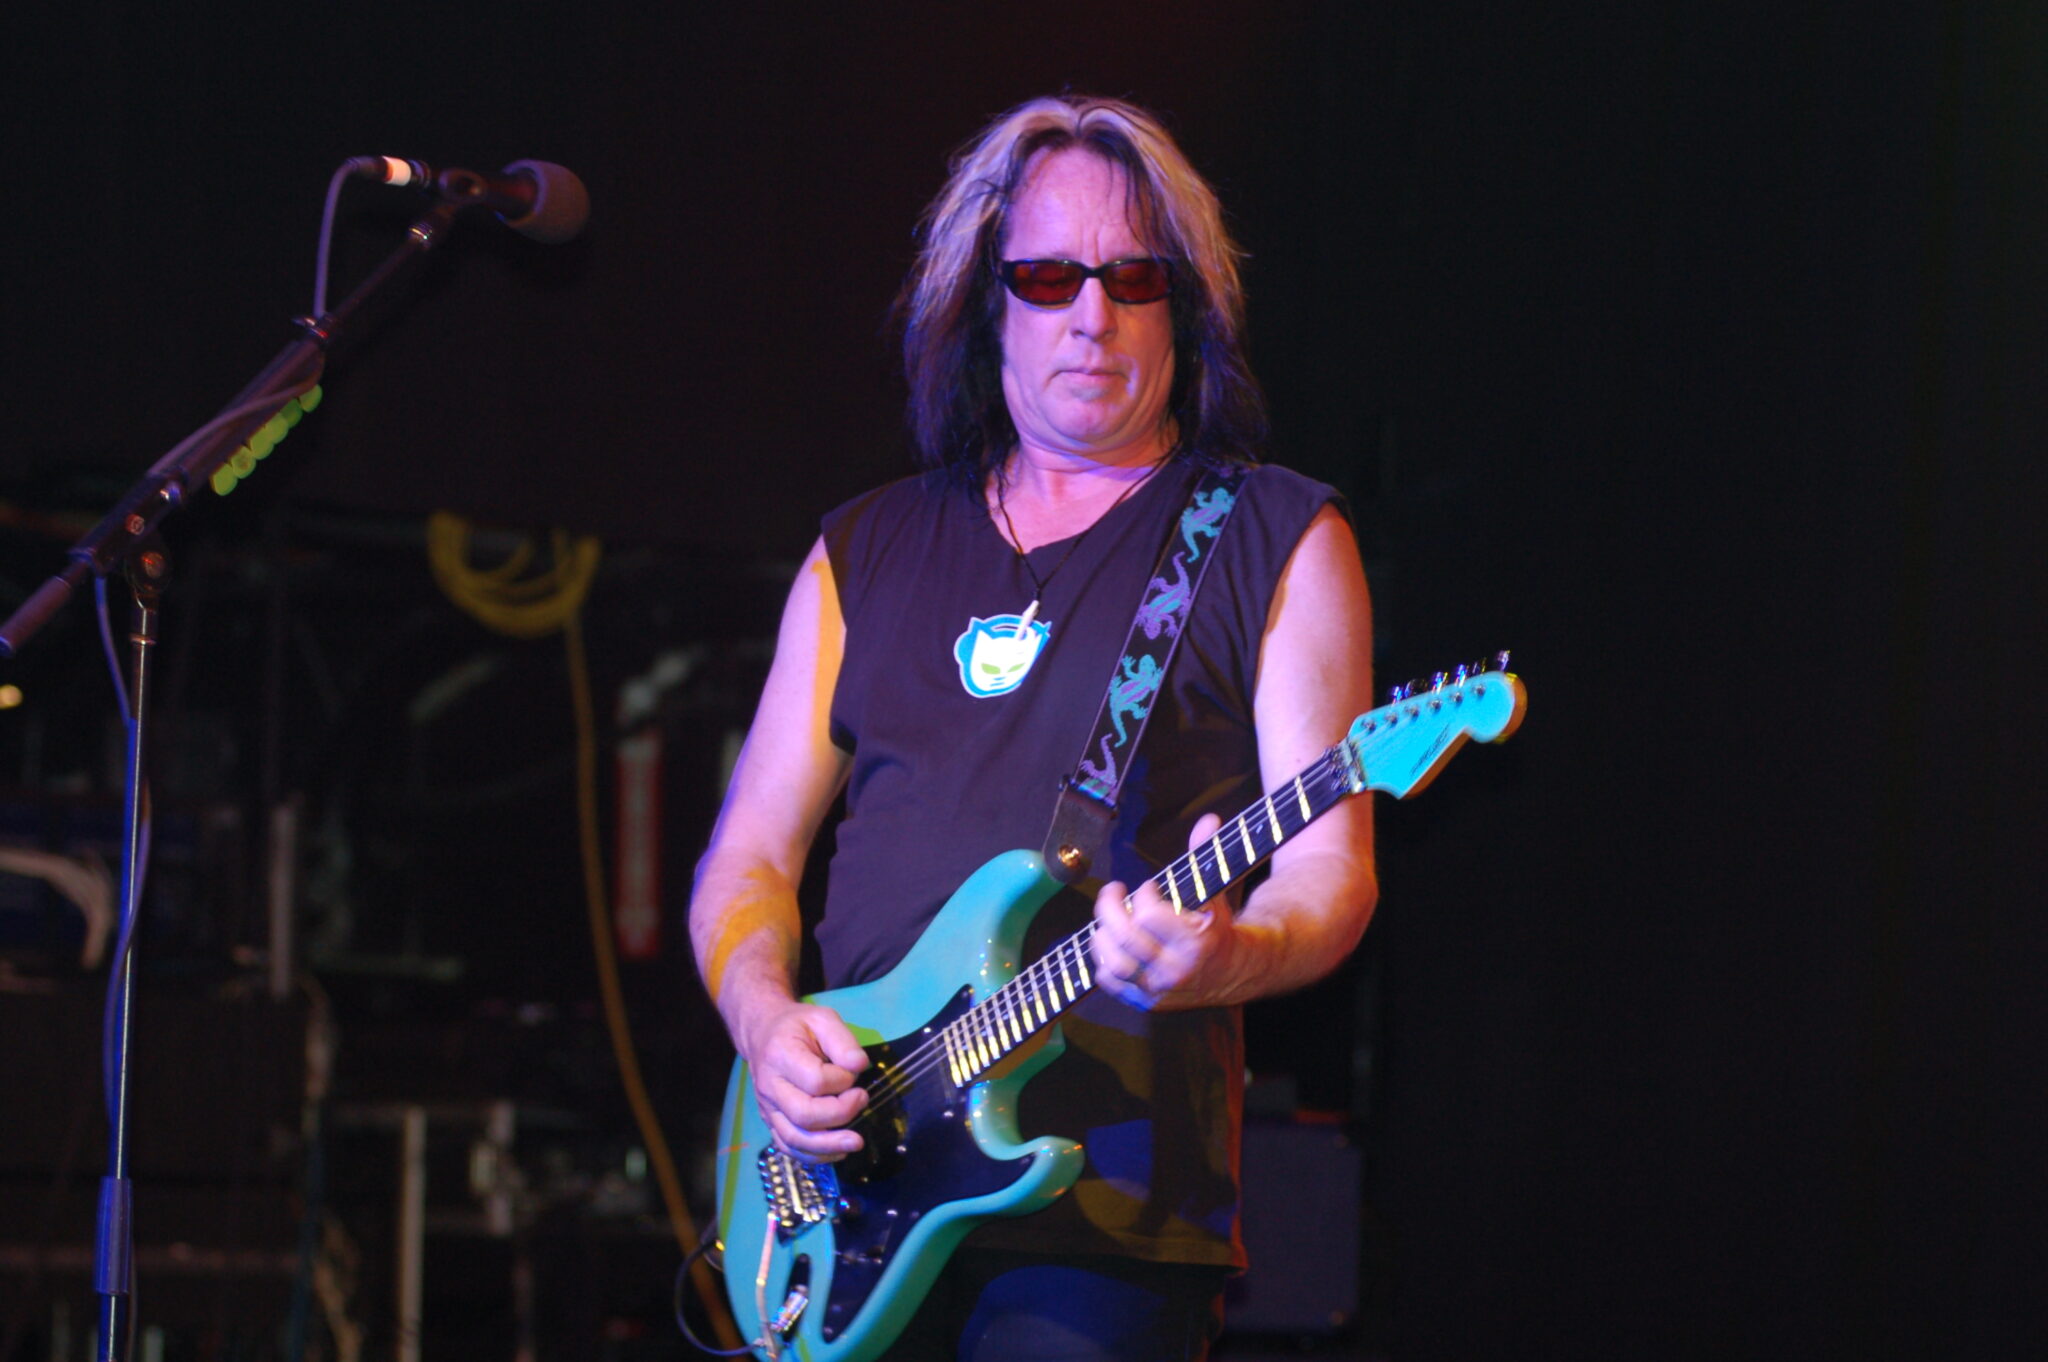 Keeping Up With Todd Rundgren